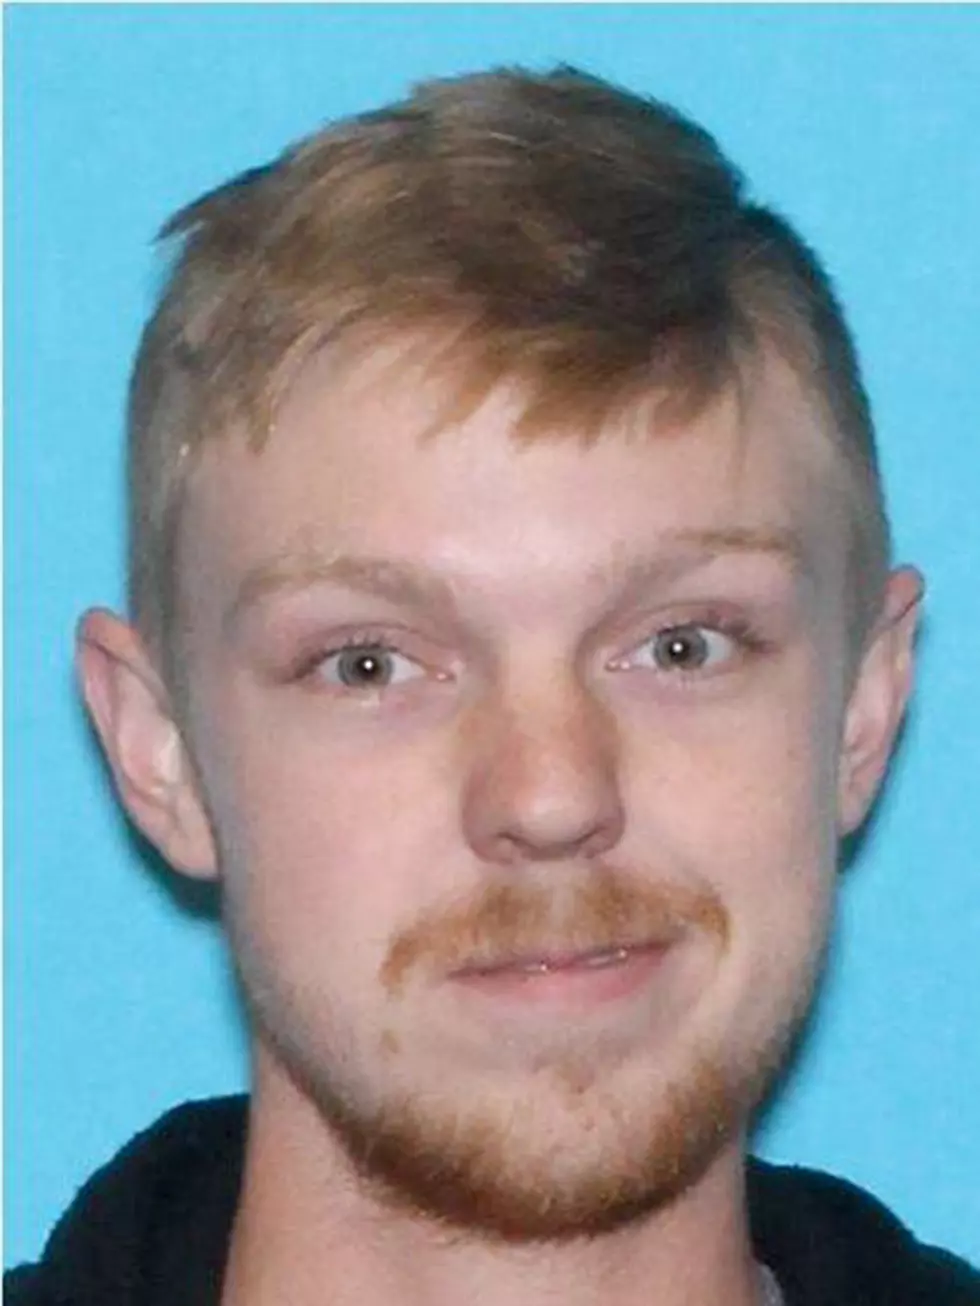 &#8216;Affluenza&#8217; Teen&#8217;s Lawyers Seek His Release From Jail